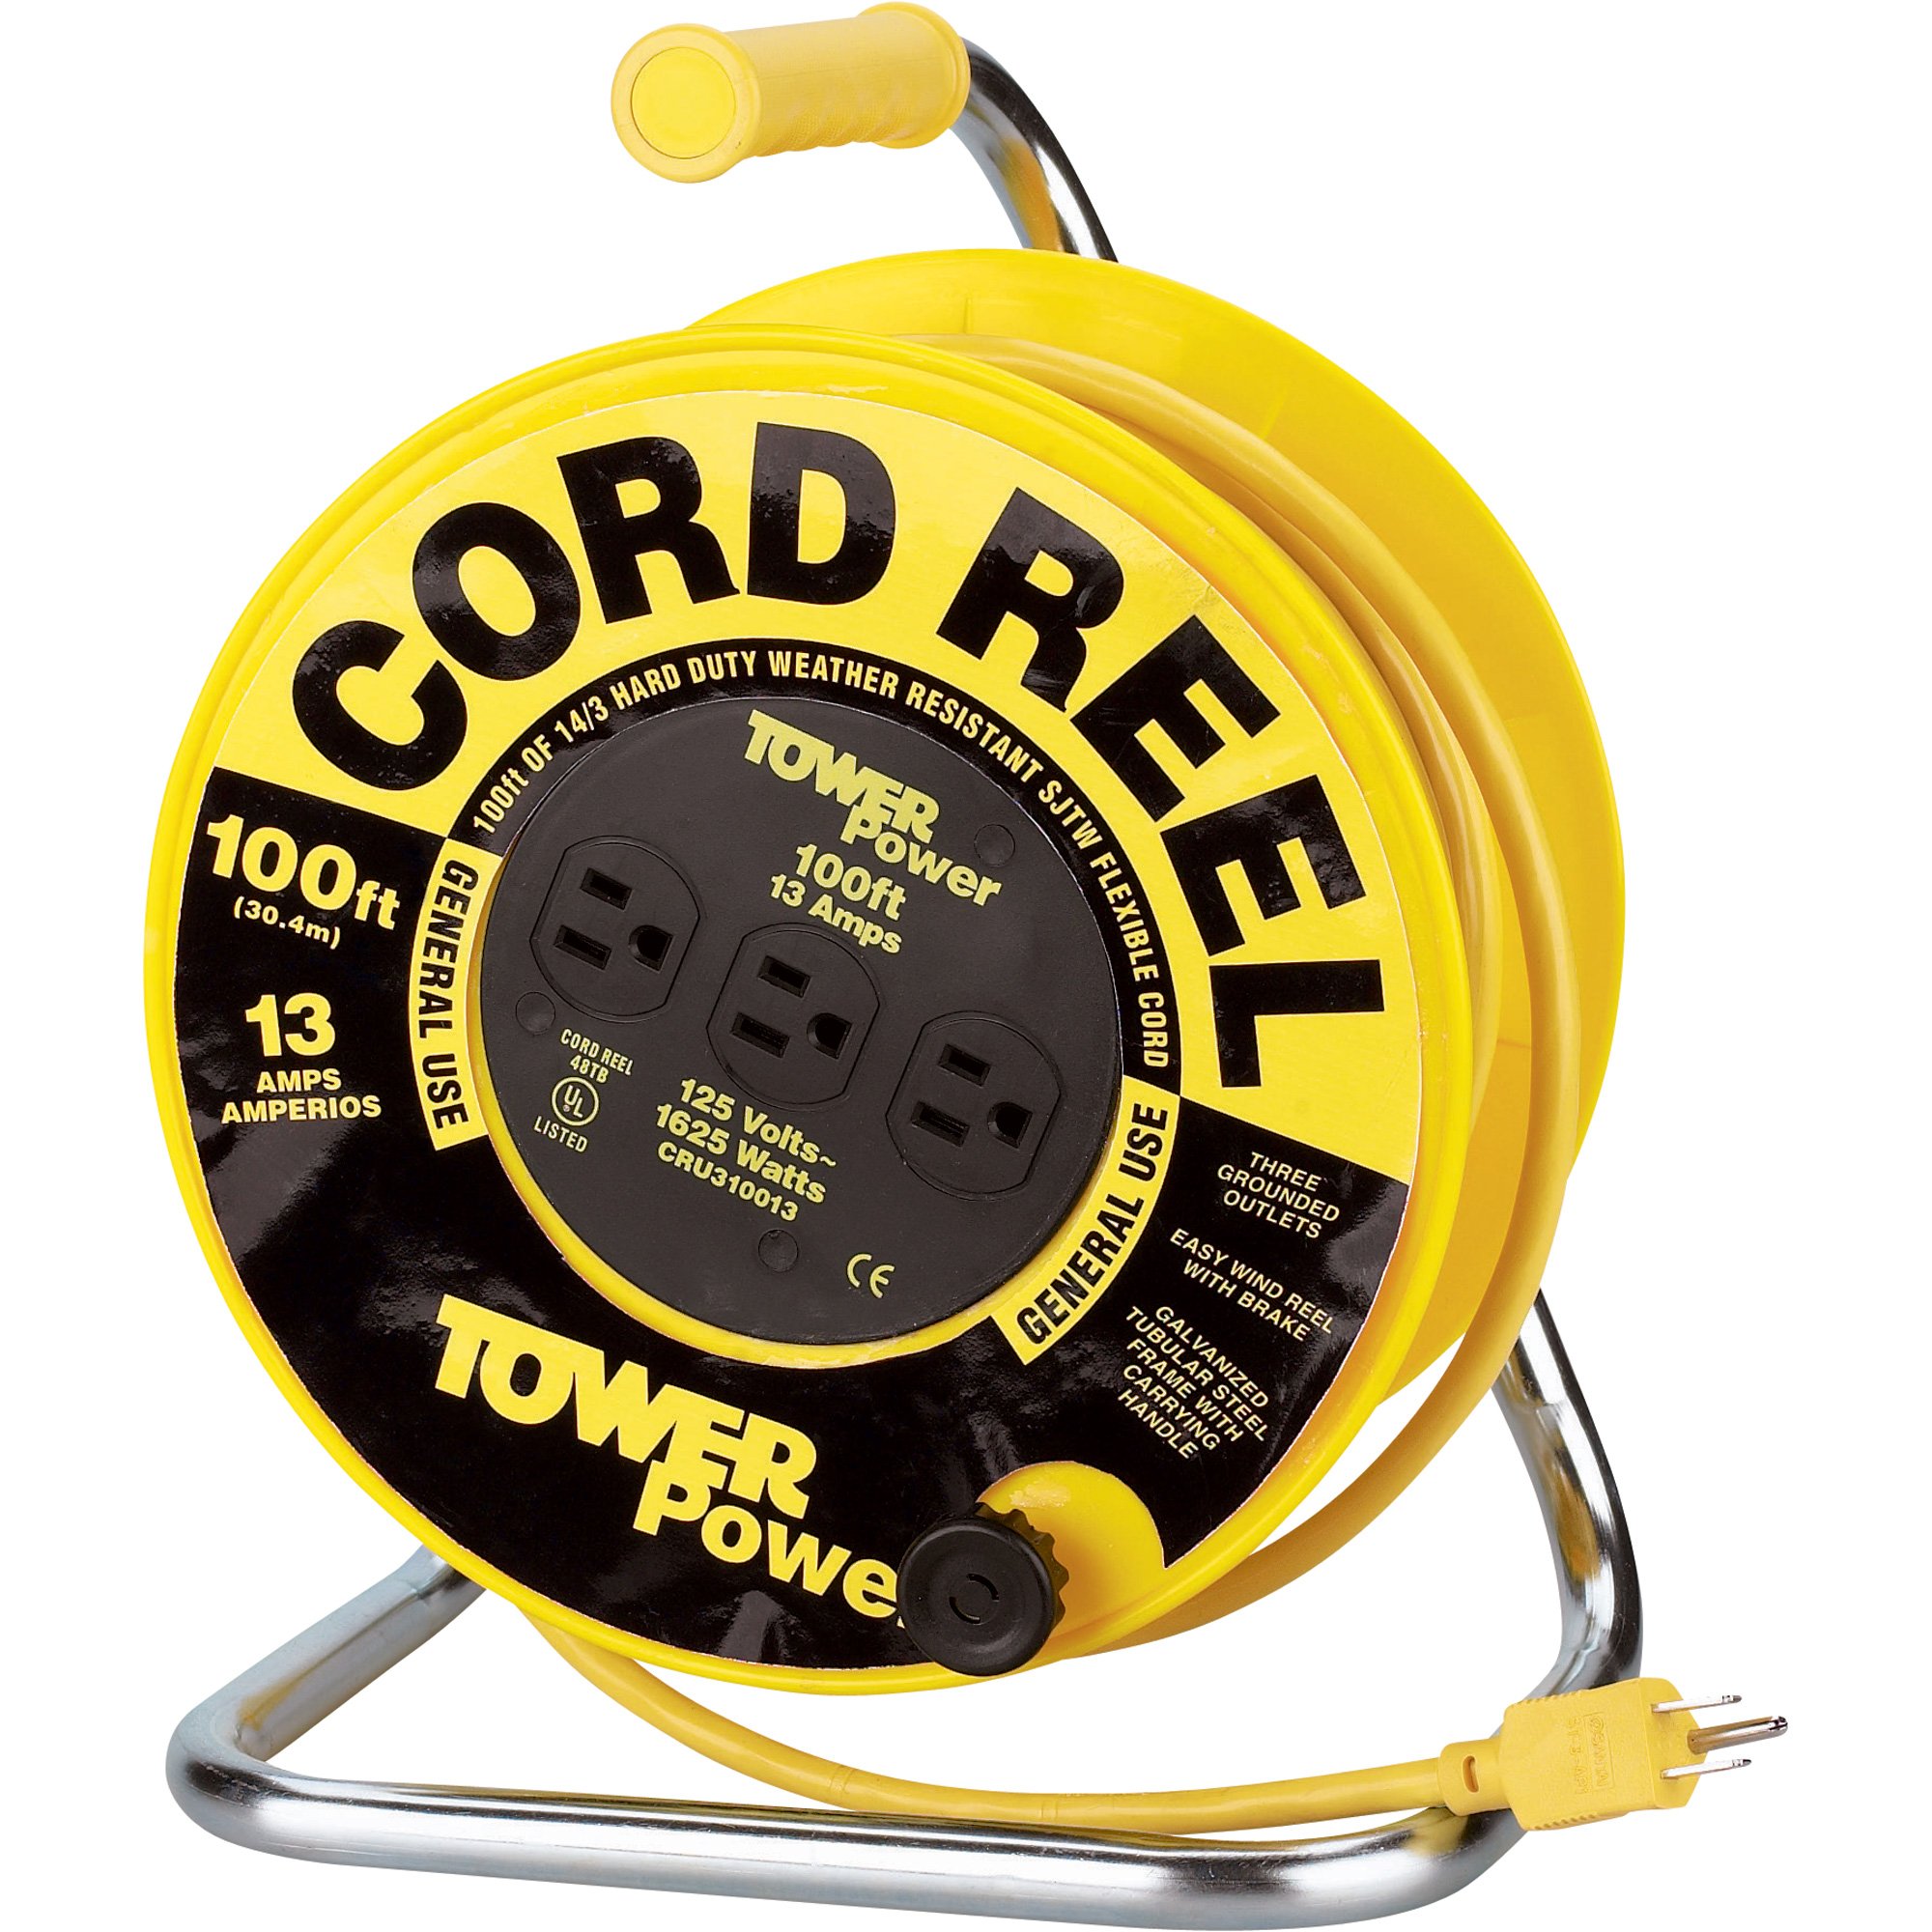 Northern Industrial Electrical Cord Reel — 15 Amp, 100ft